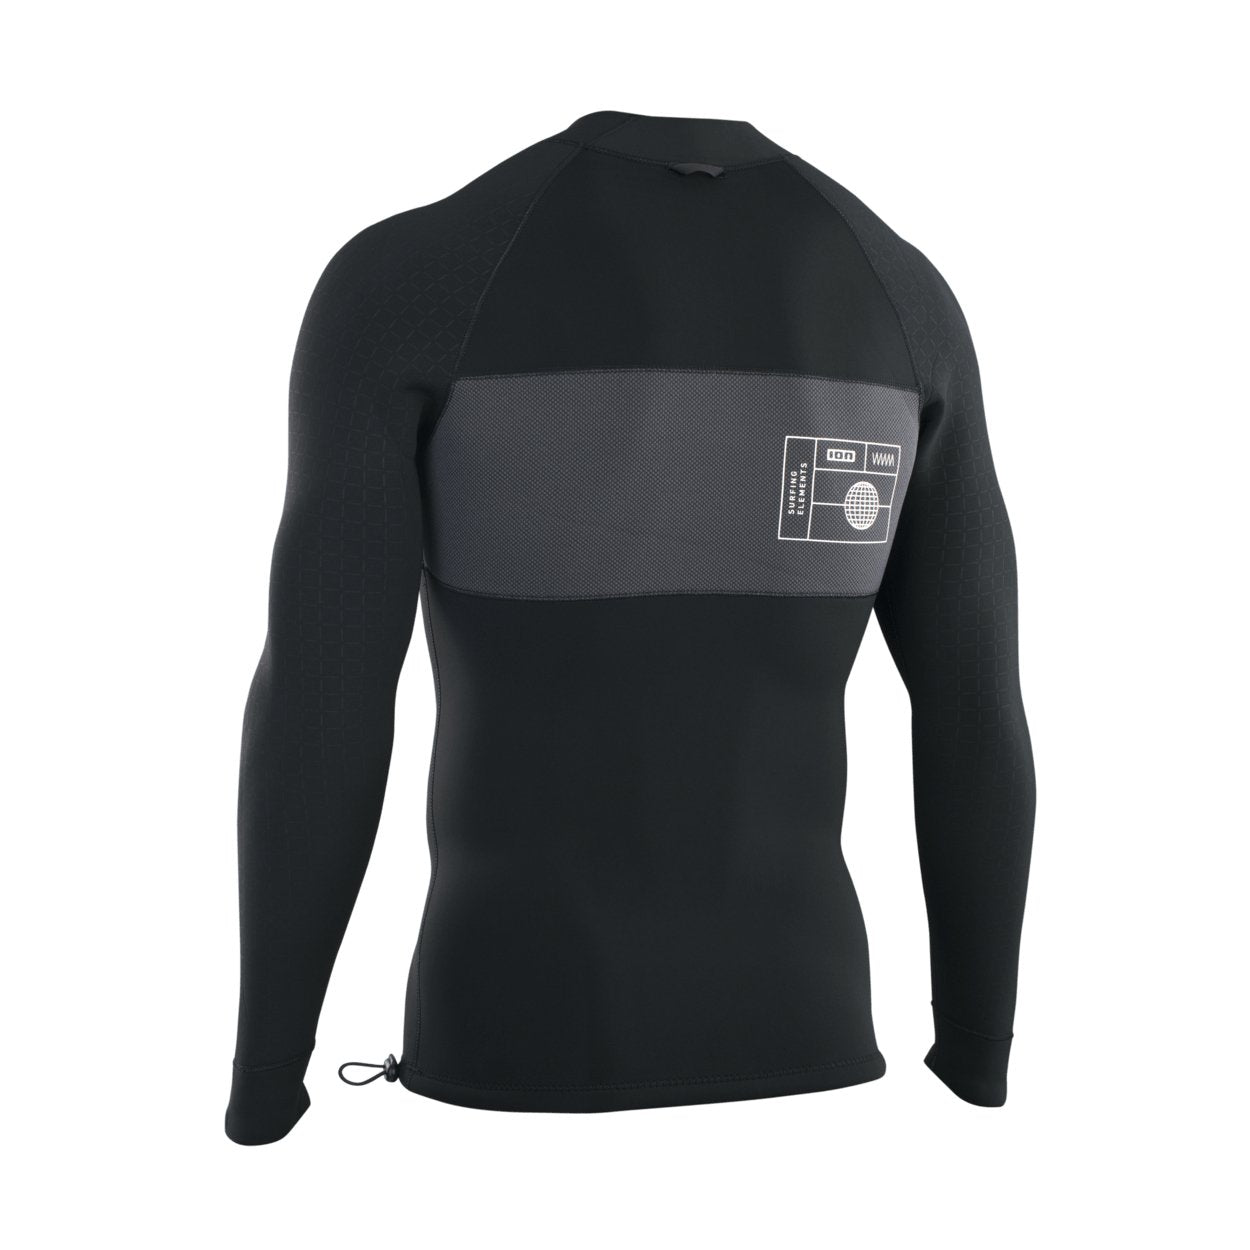 ION Neo Top 2/2 LS men 2023 - Worthing Watersports - 9010583091495 - Tops - ION Water